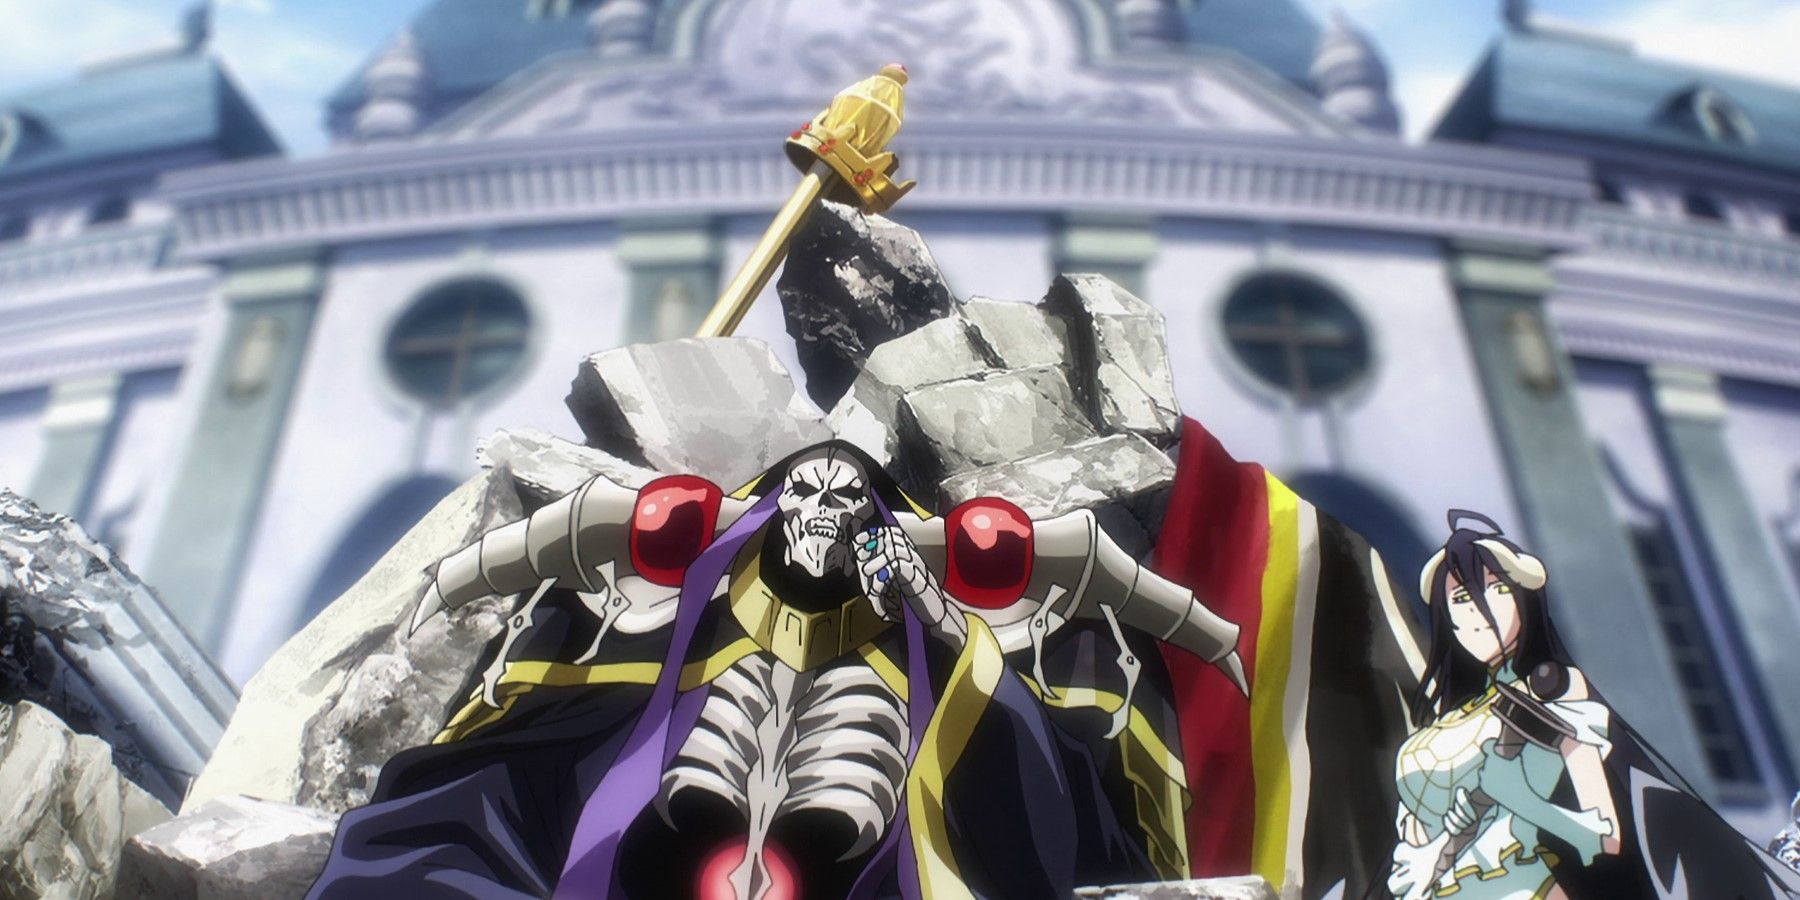 Ainz is Satisfied – Overlord IV Episode 13